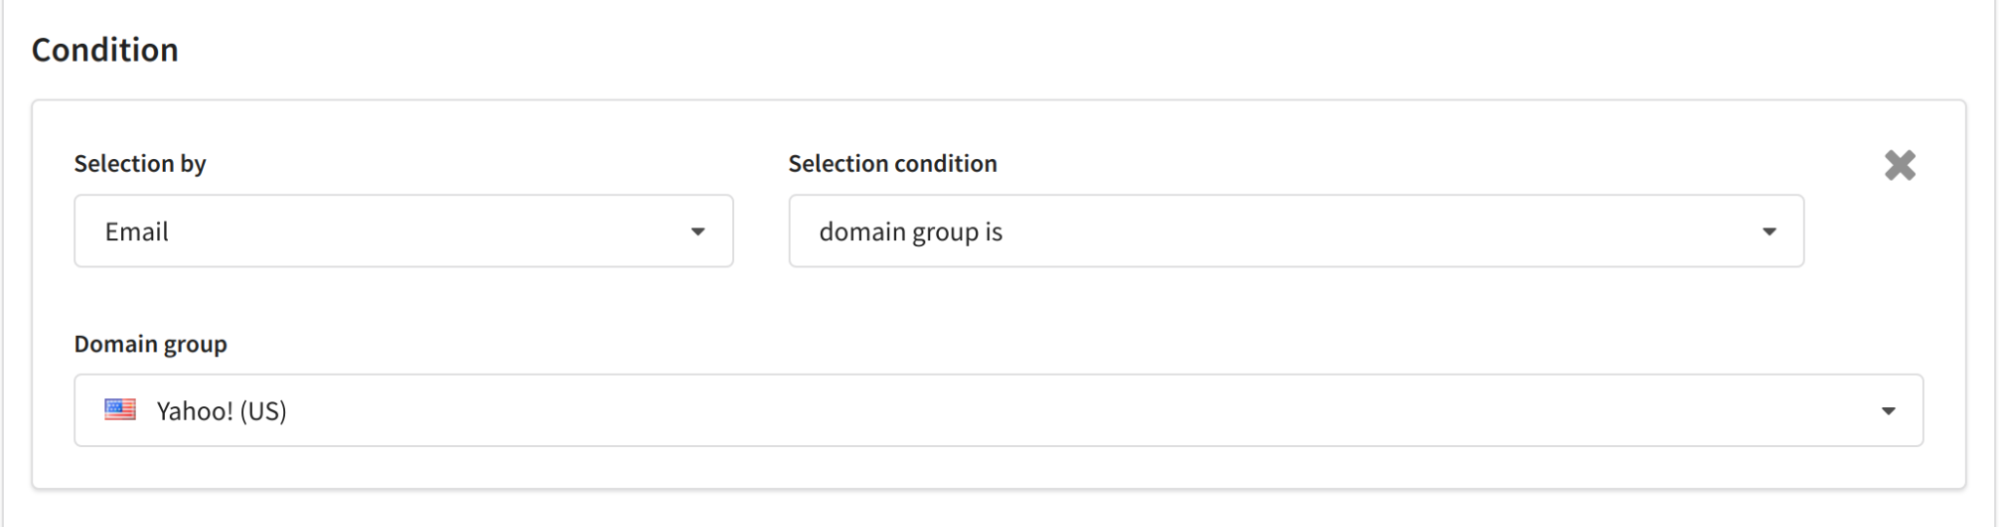 Selecting email domain as a condition for segmentation